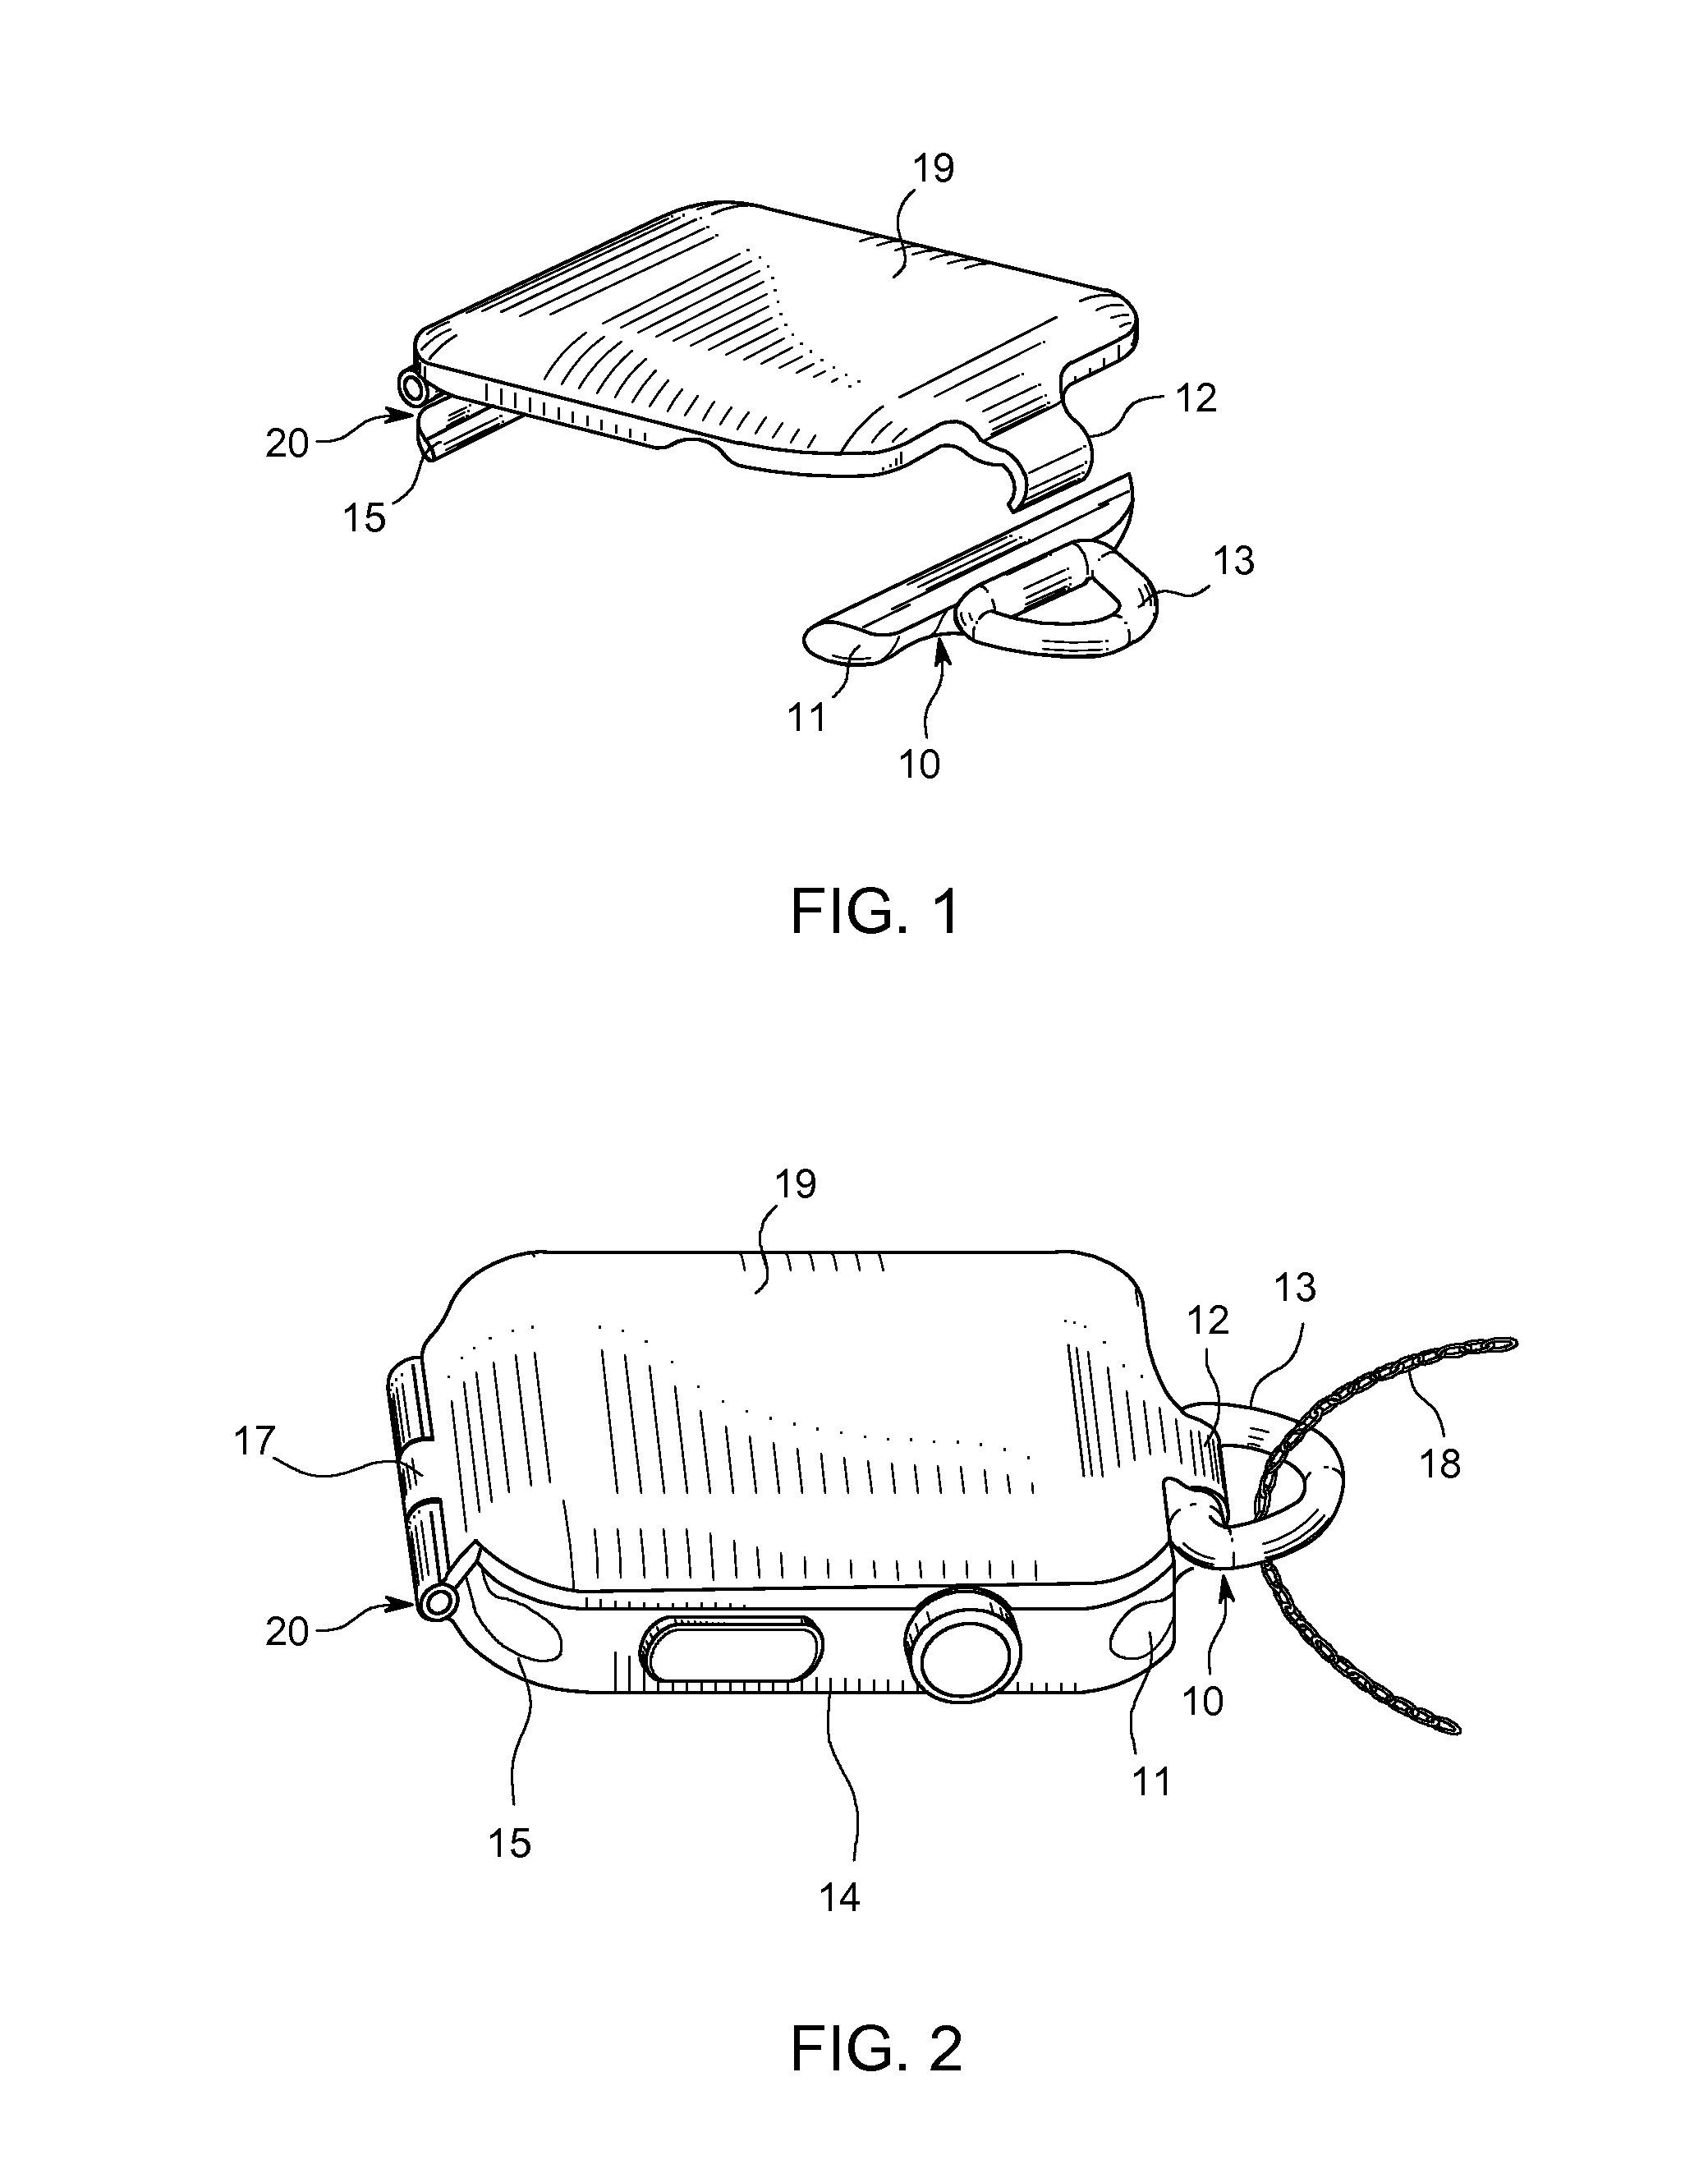 Accessory adapter system for wearable computing device